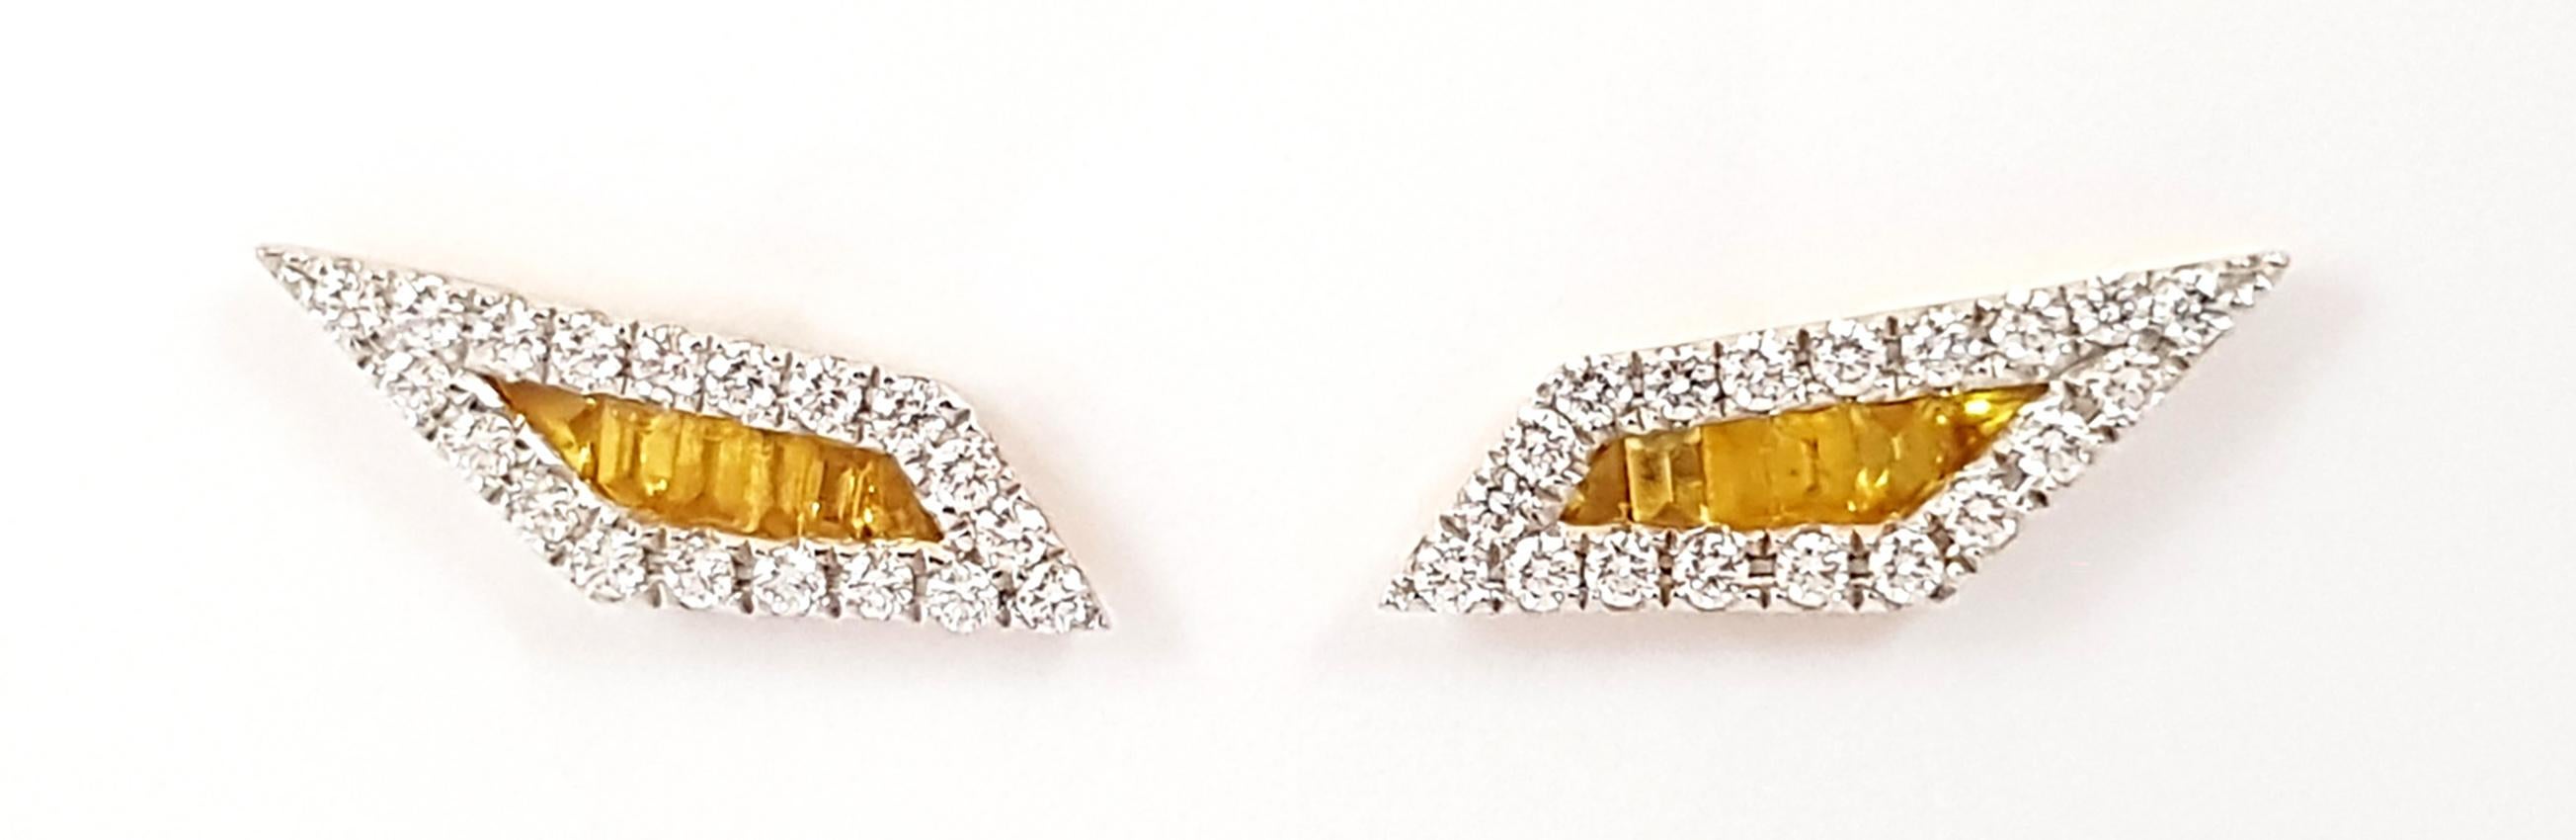 Yellow Sapphire 0.57 carats with Diamond 0.37 carat Earrings set in 18K Gold Settings

Width: 0.5 cm
Length: 1.4 cm
Weight: 3.57 grams

The ancient Japanese tradition of paper folding has inspired the form and elements of this modern collection.